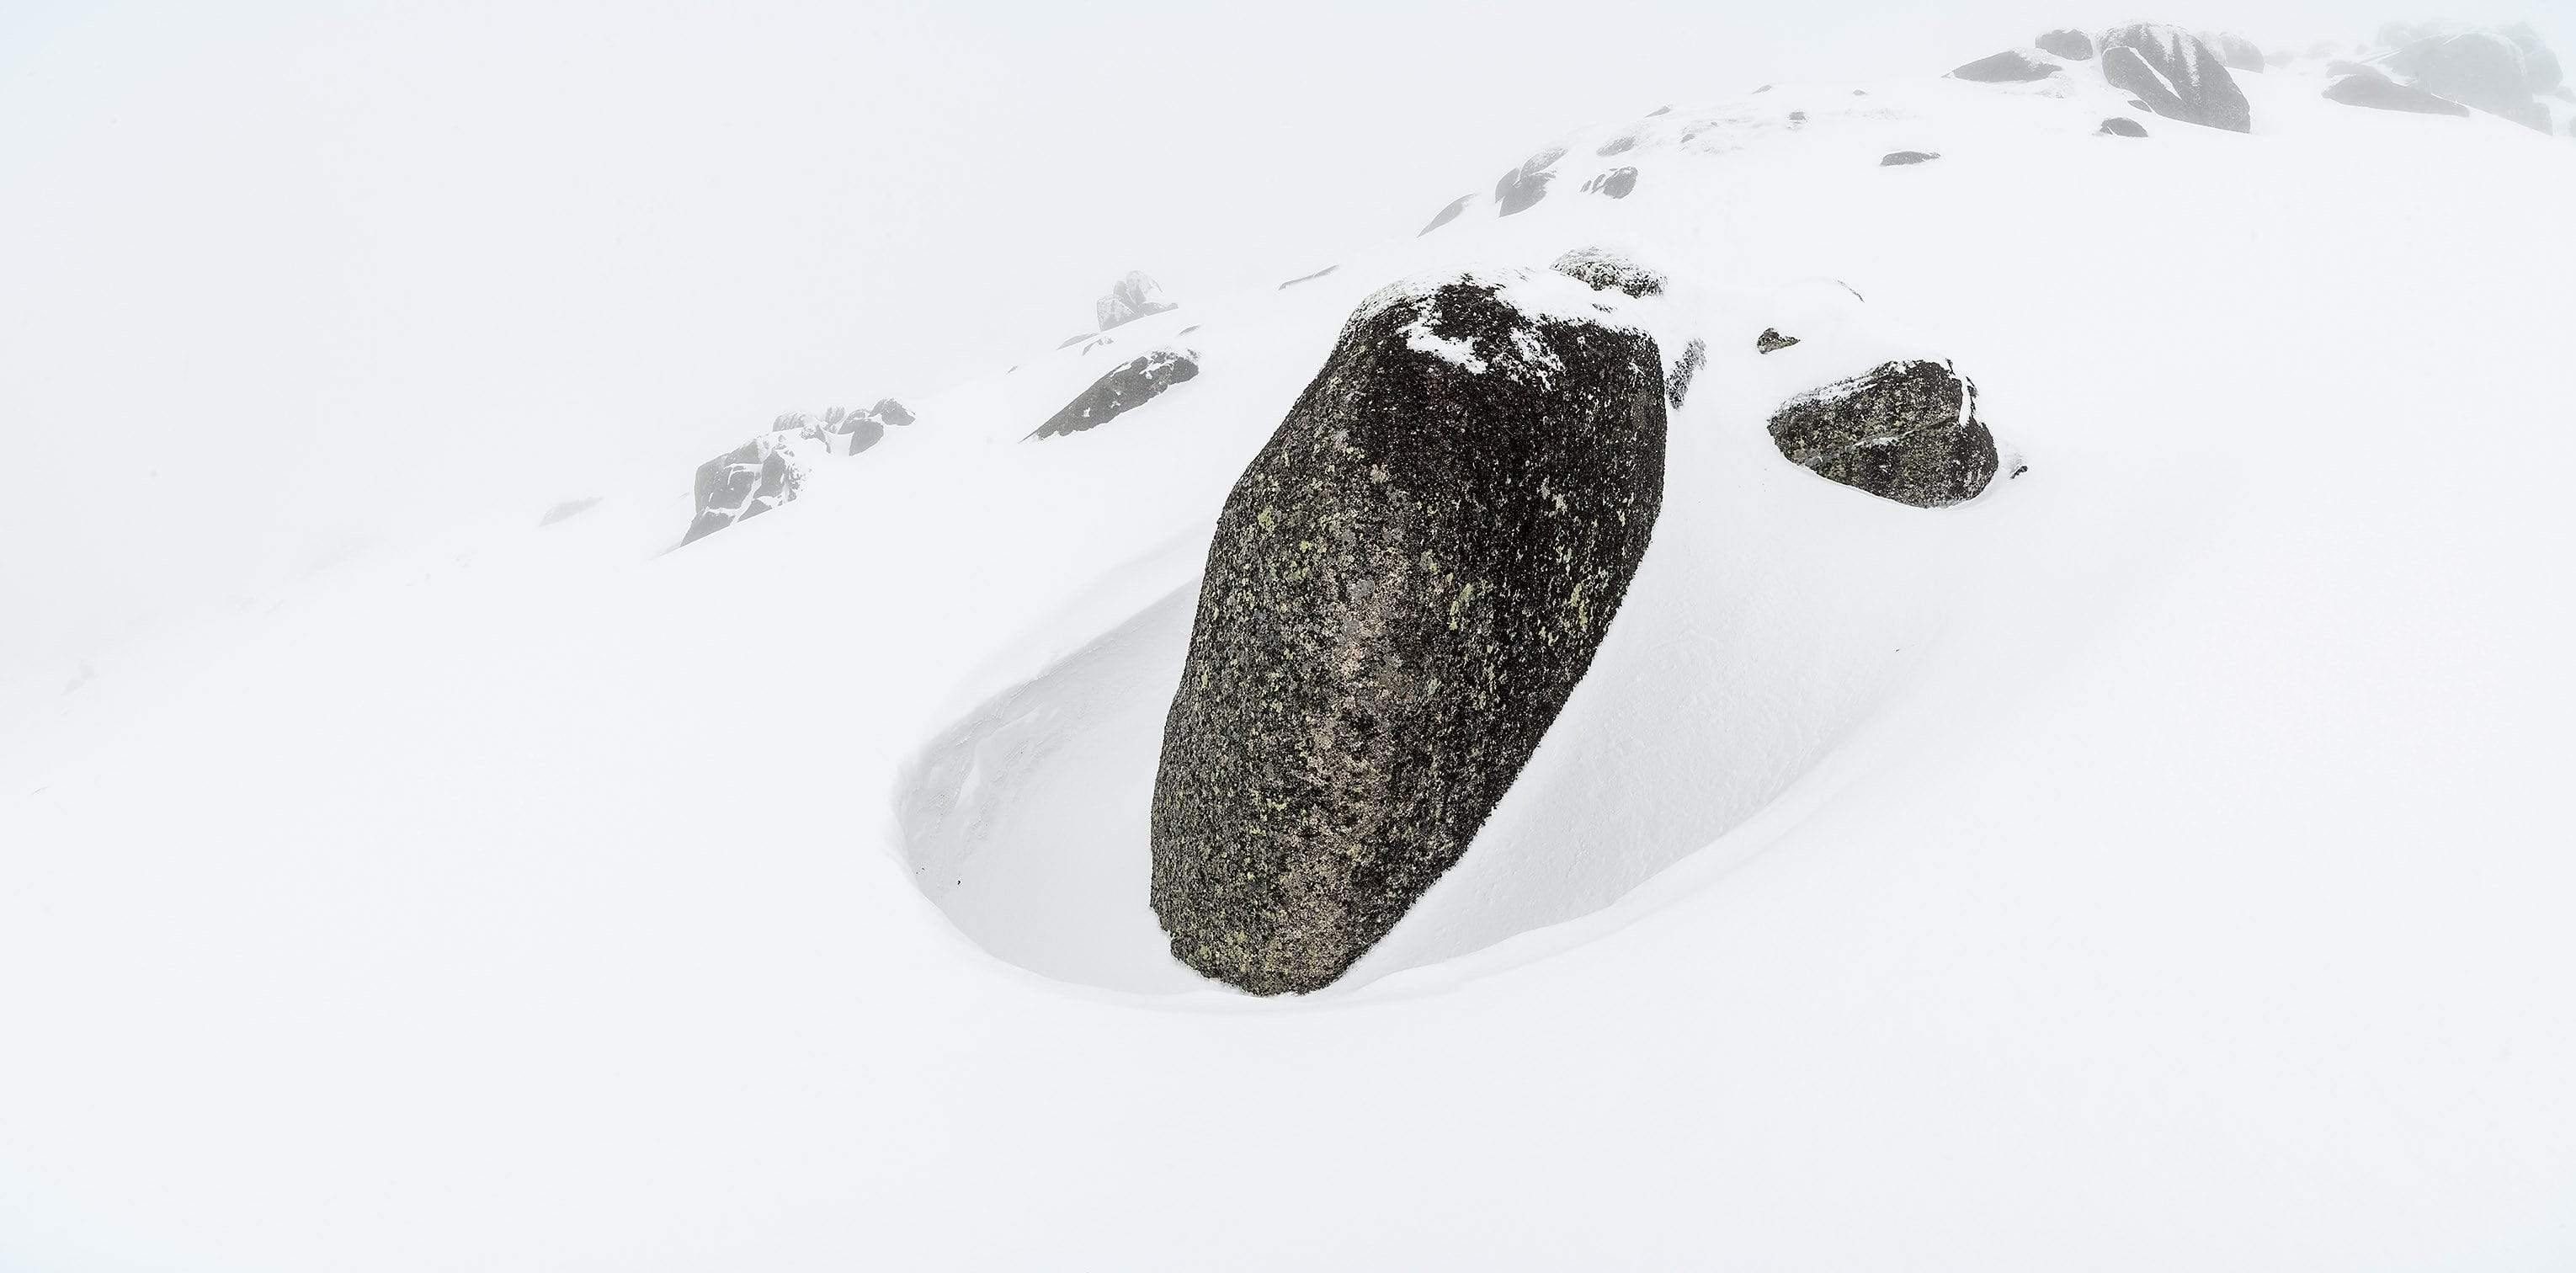 A fully white snow-covered land with a black stony rock, Teardrop - Snowy Mountains NSW